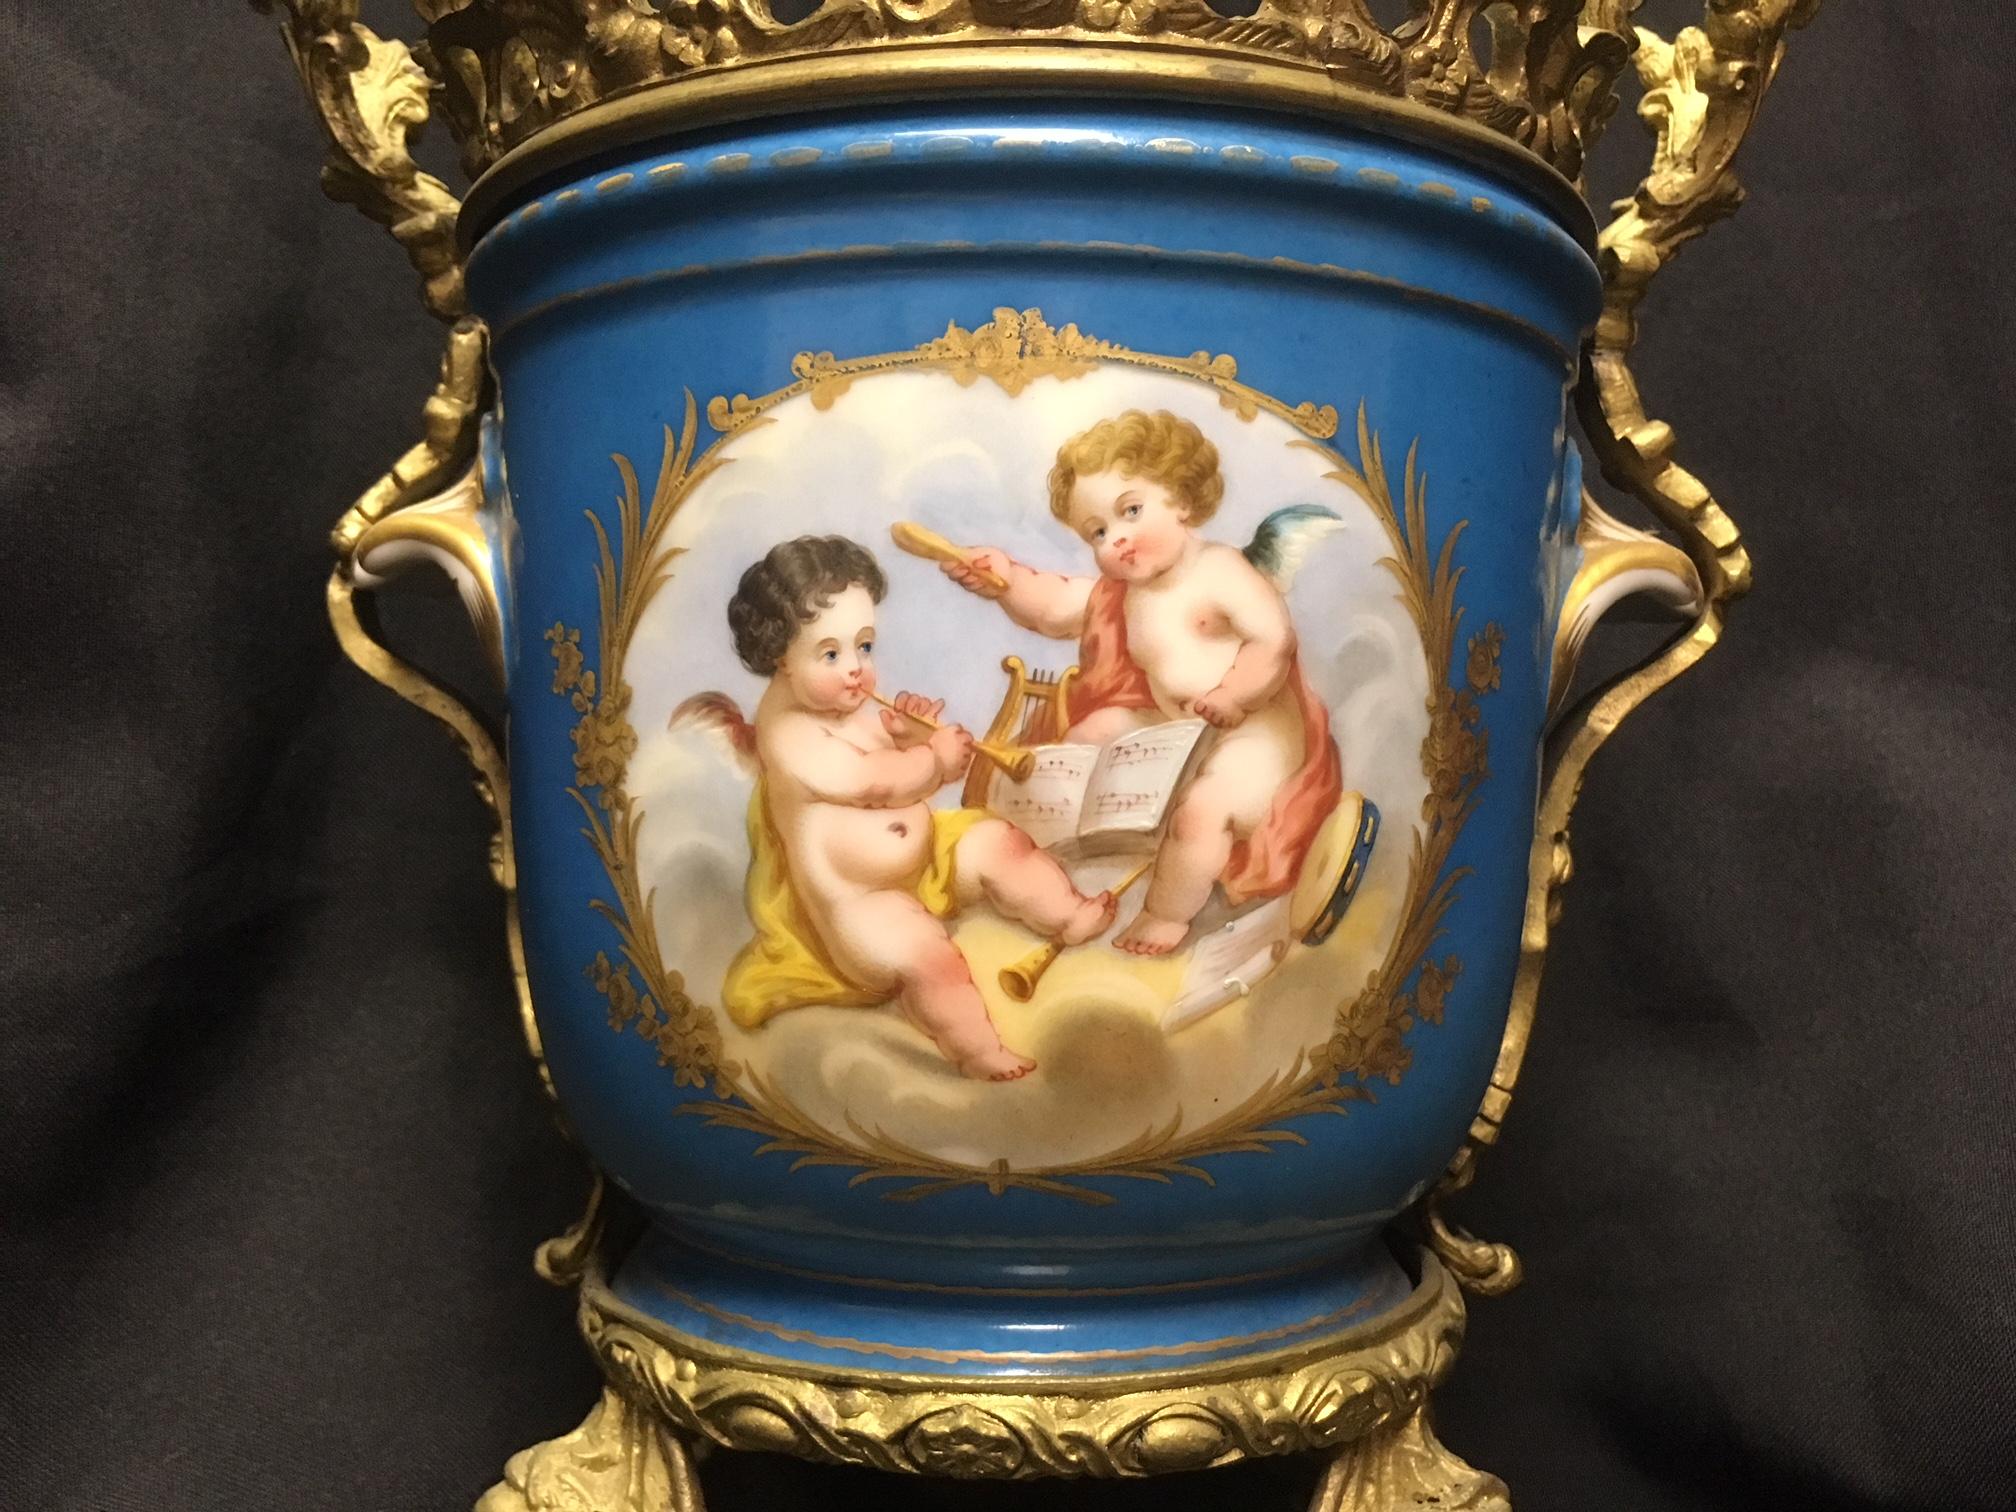 Gilt Pair of French Sevres Style Ormolu-Mounted Porcelain Planters